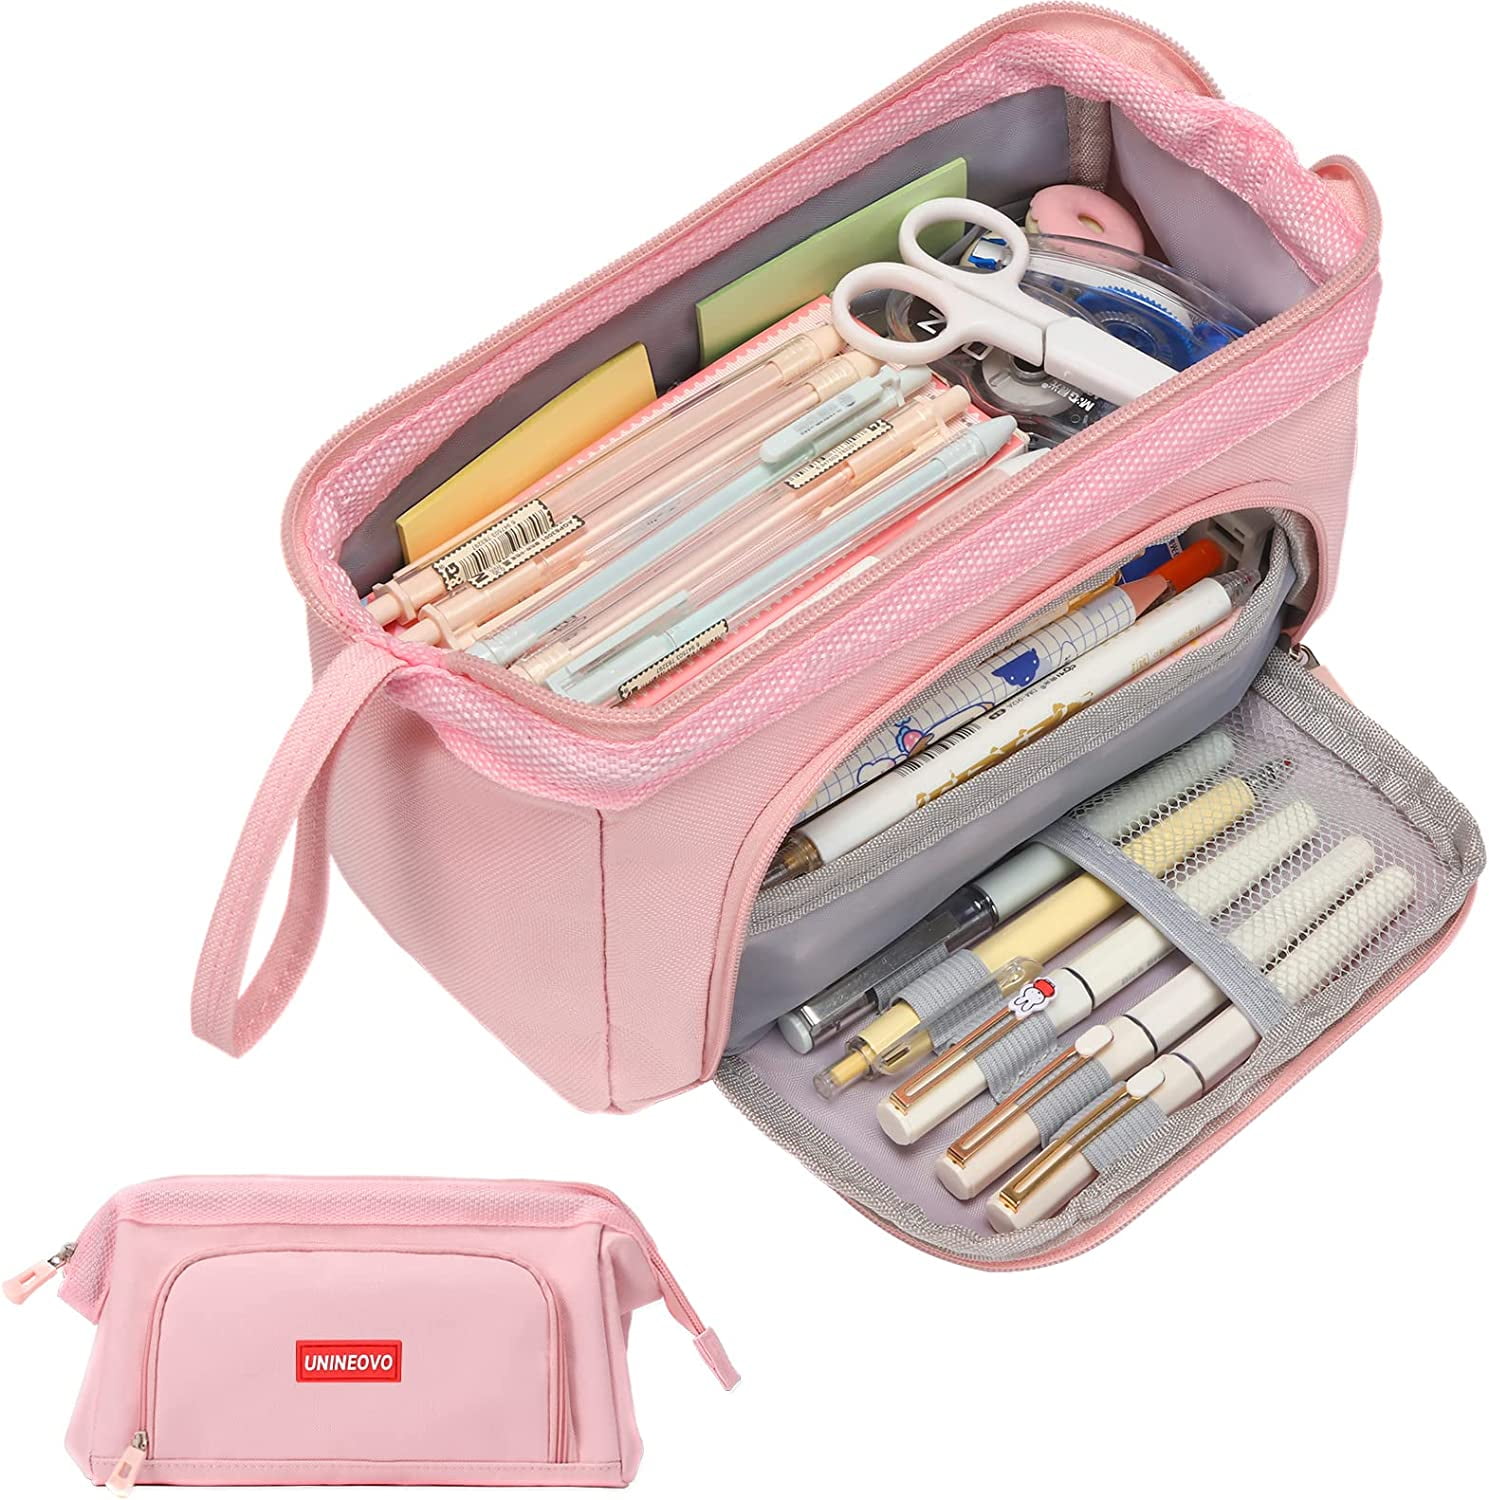 Dropship Large Capacity Pencil Case: Adorable School Supplies Pencil  Storage Bag For Kids - Perfect Gift For Boys And Girls! to Sell Online at a  Lower Price